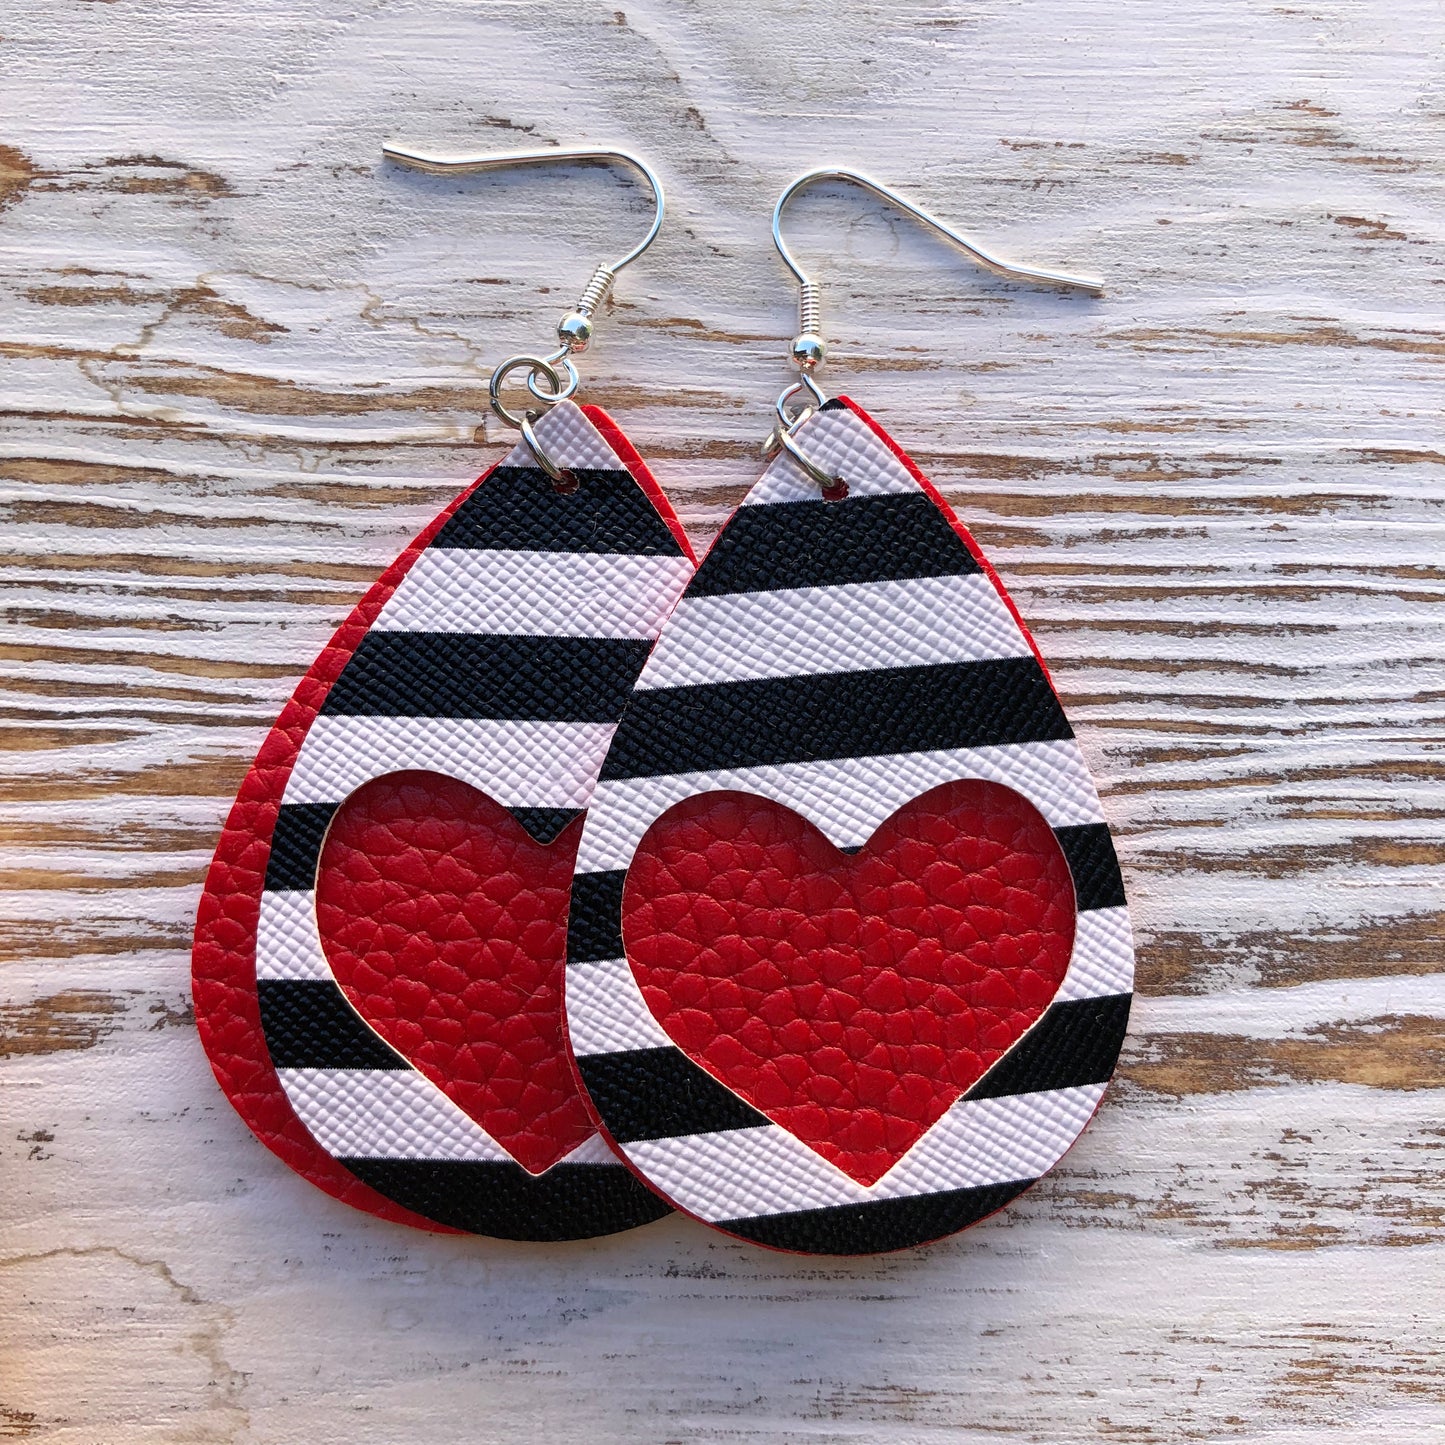 Red Leather Heart Cutout Stripe Leather Earrings